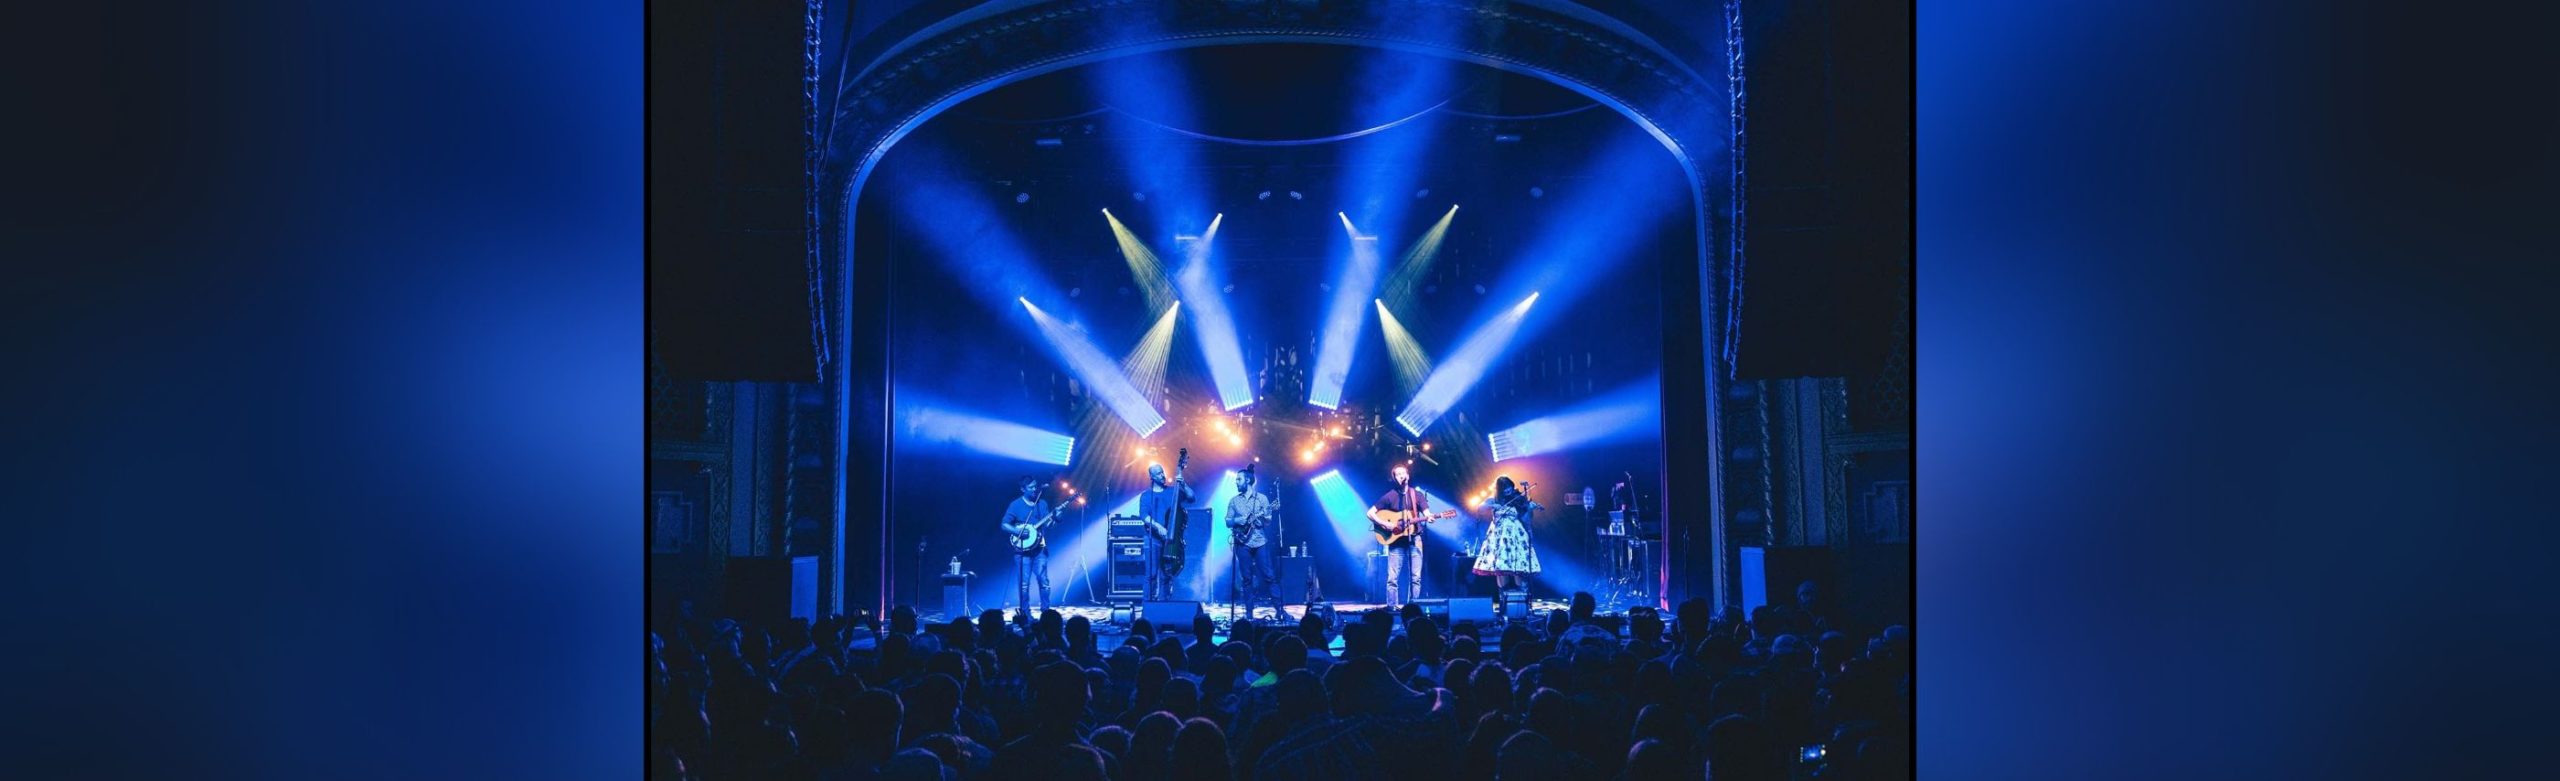 Yonder Mountain String Band Announces Two Montana Shows Image